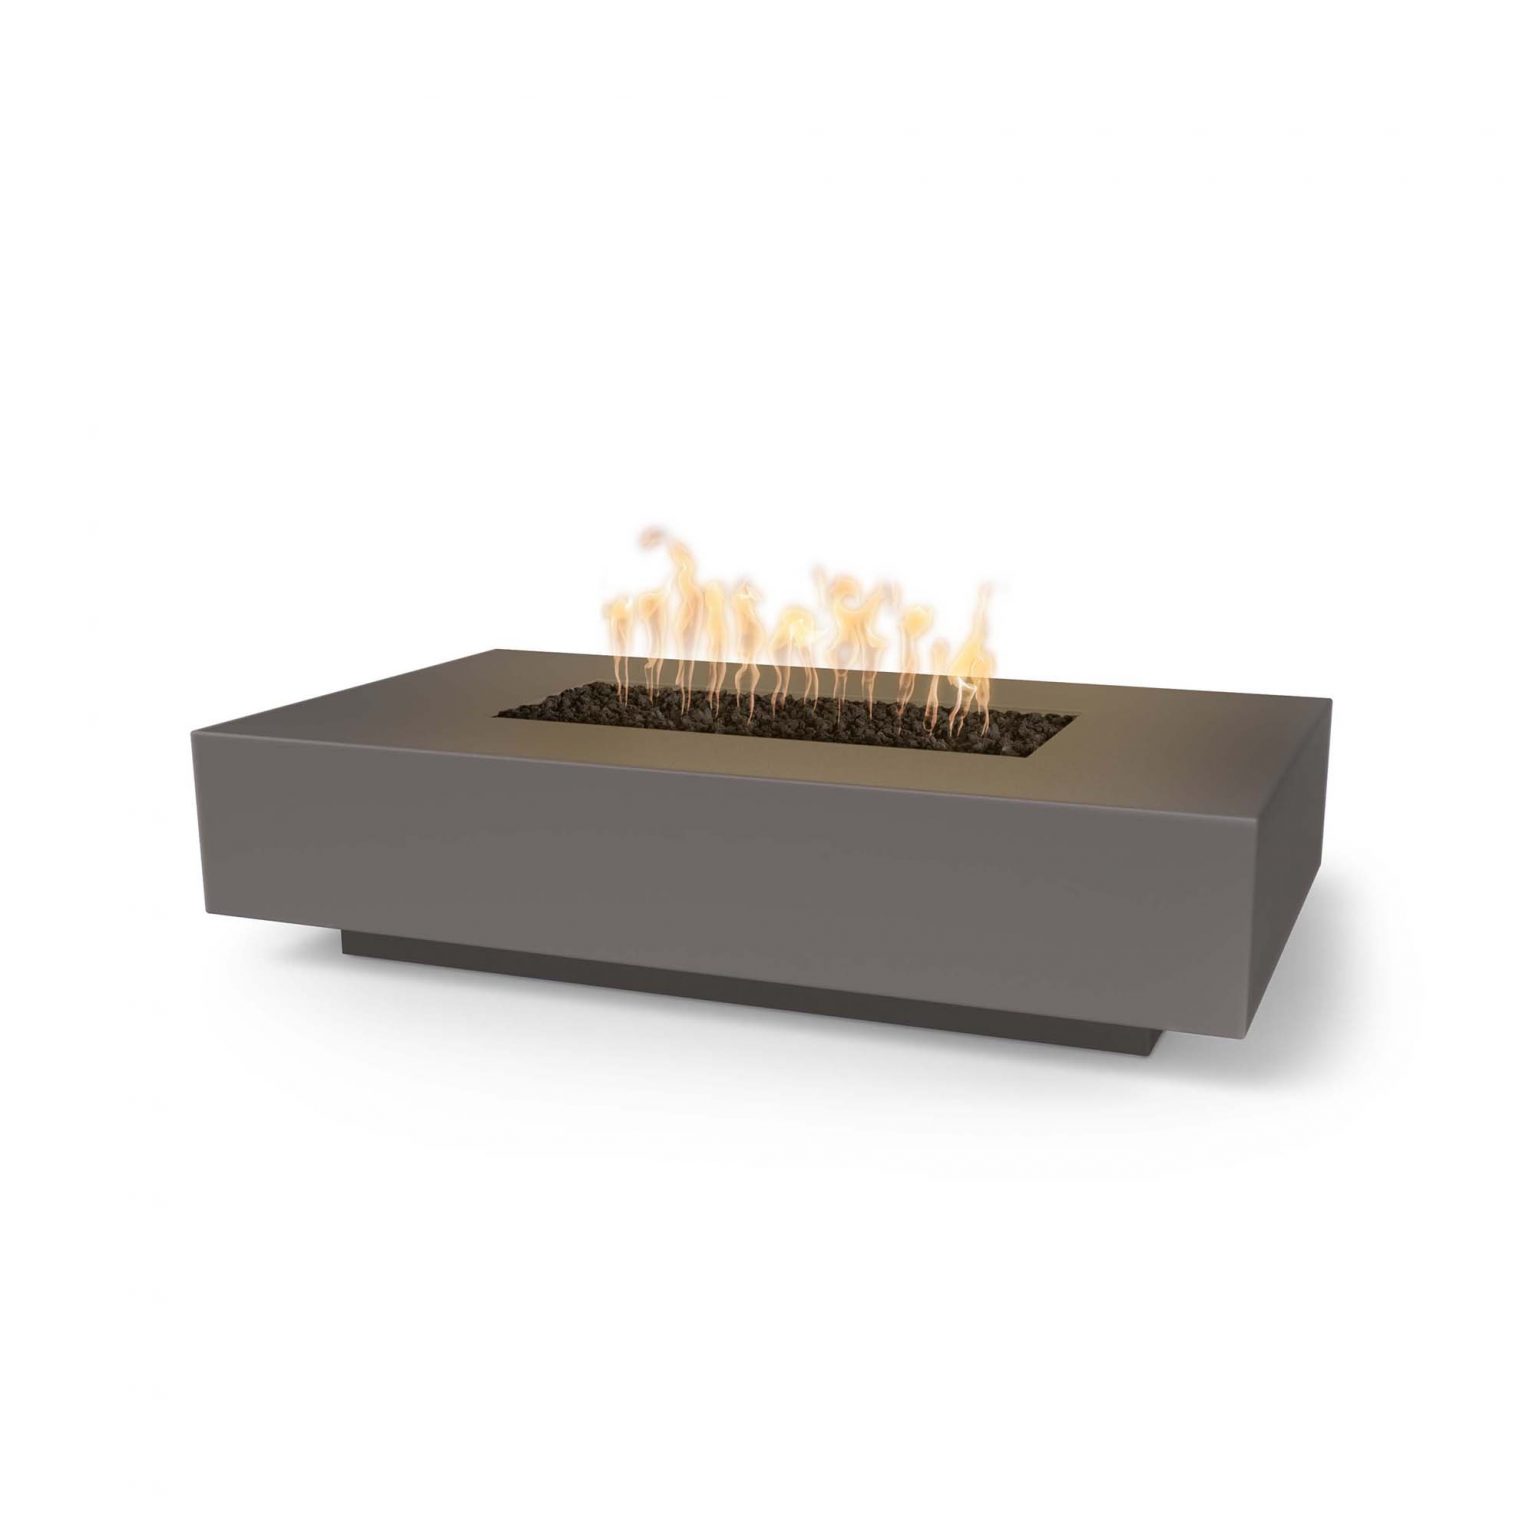 Stainless Steel "Cabo" Linear Fire Pit The Outdoor Plus (TOP Ignition Options: Match Lit Ignition, TOP Linear Sizes: 56 x 38 inch)